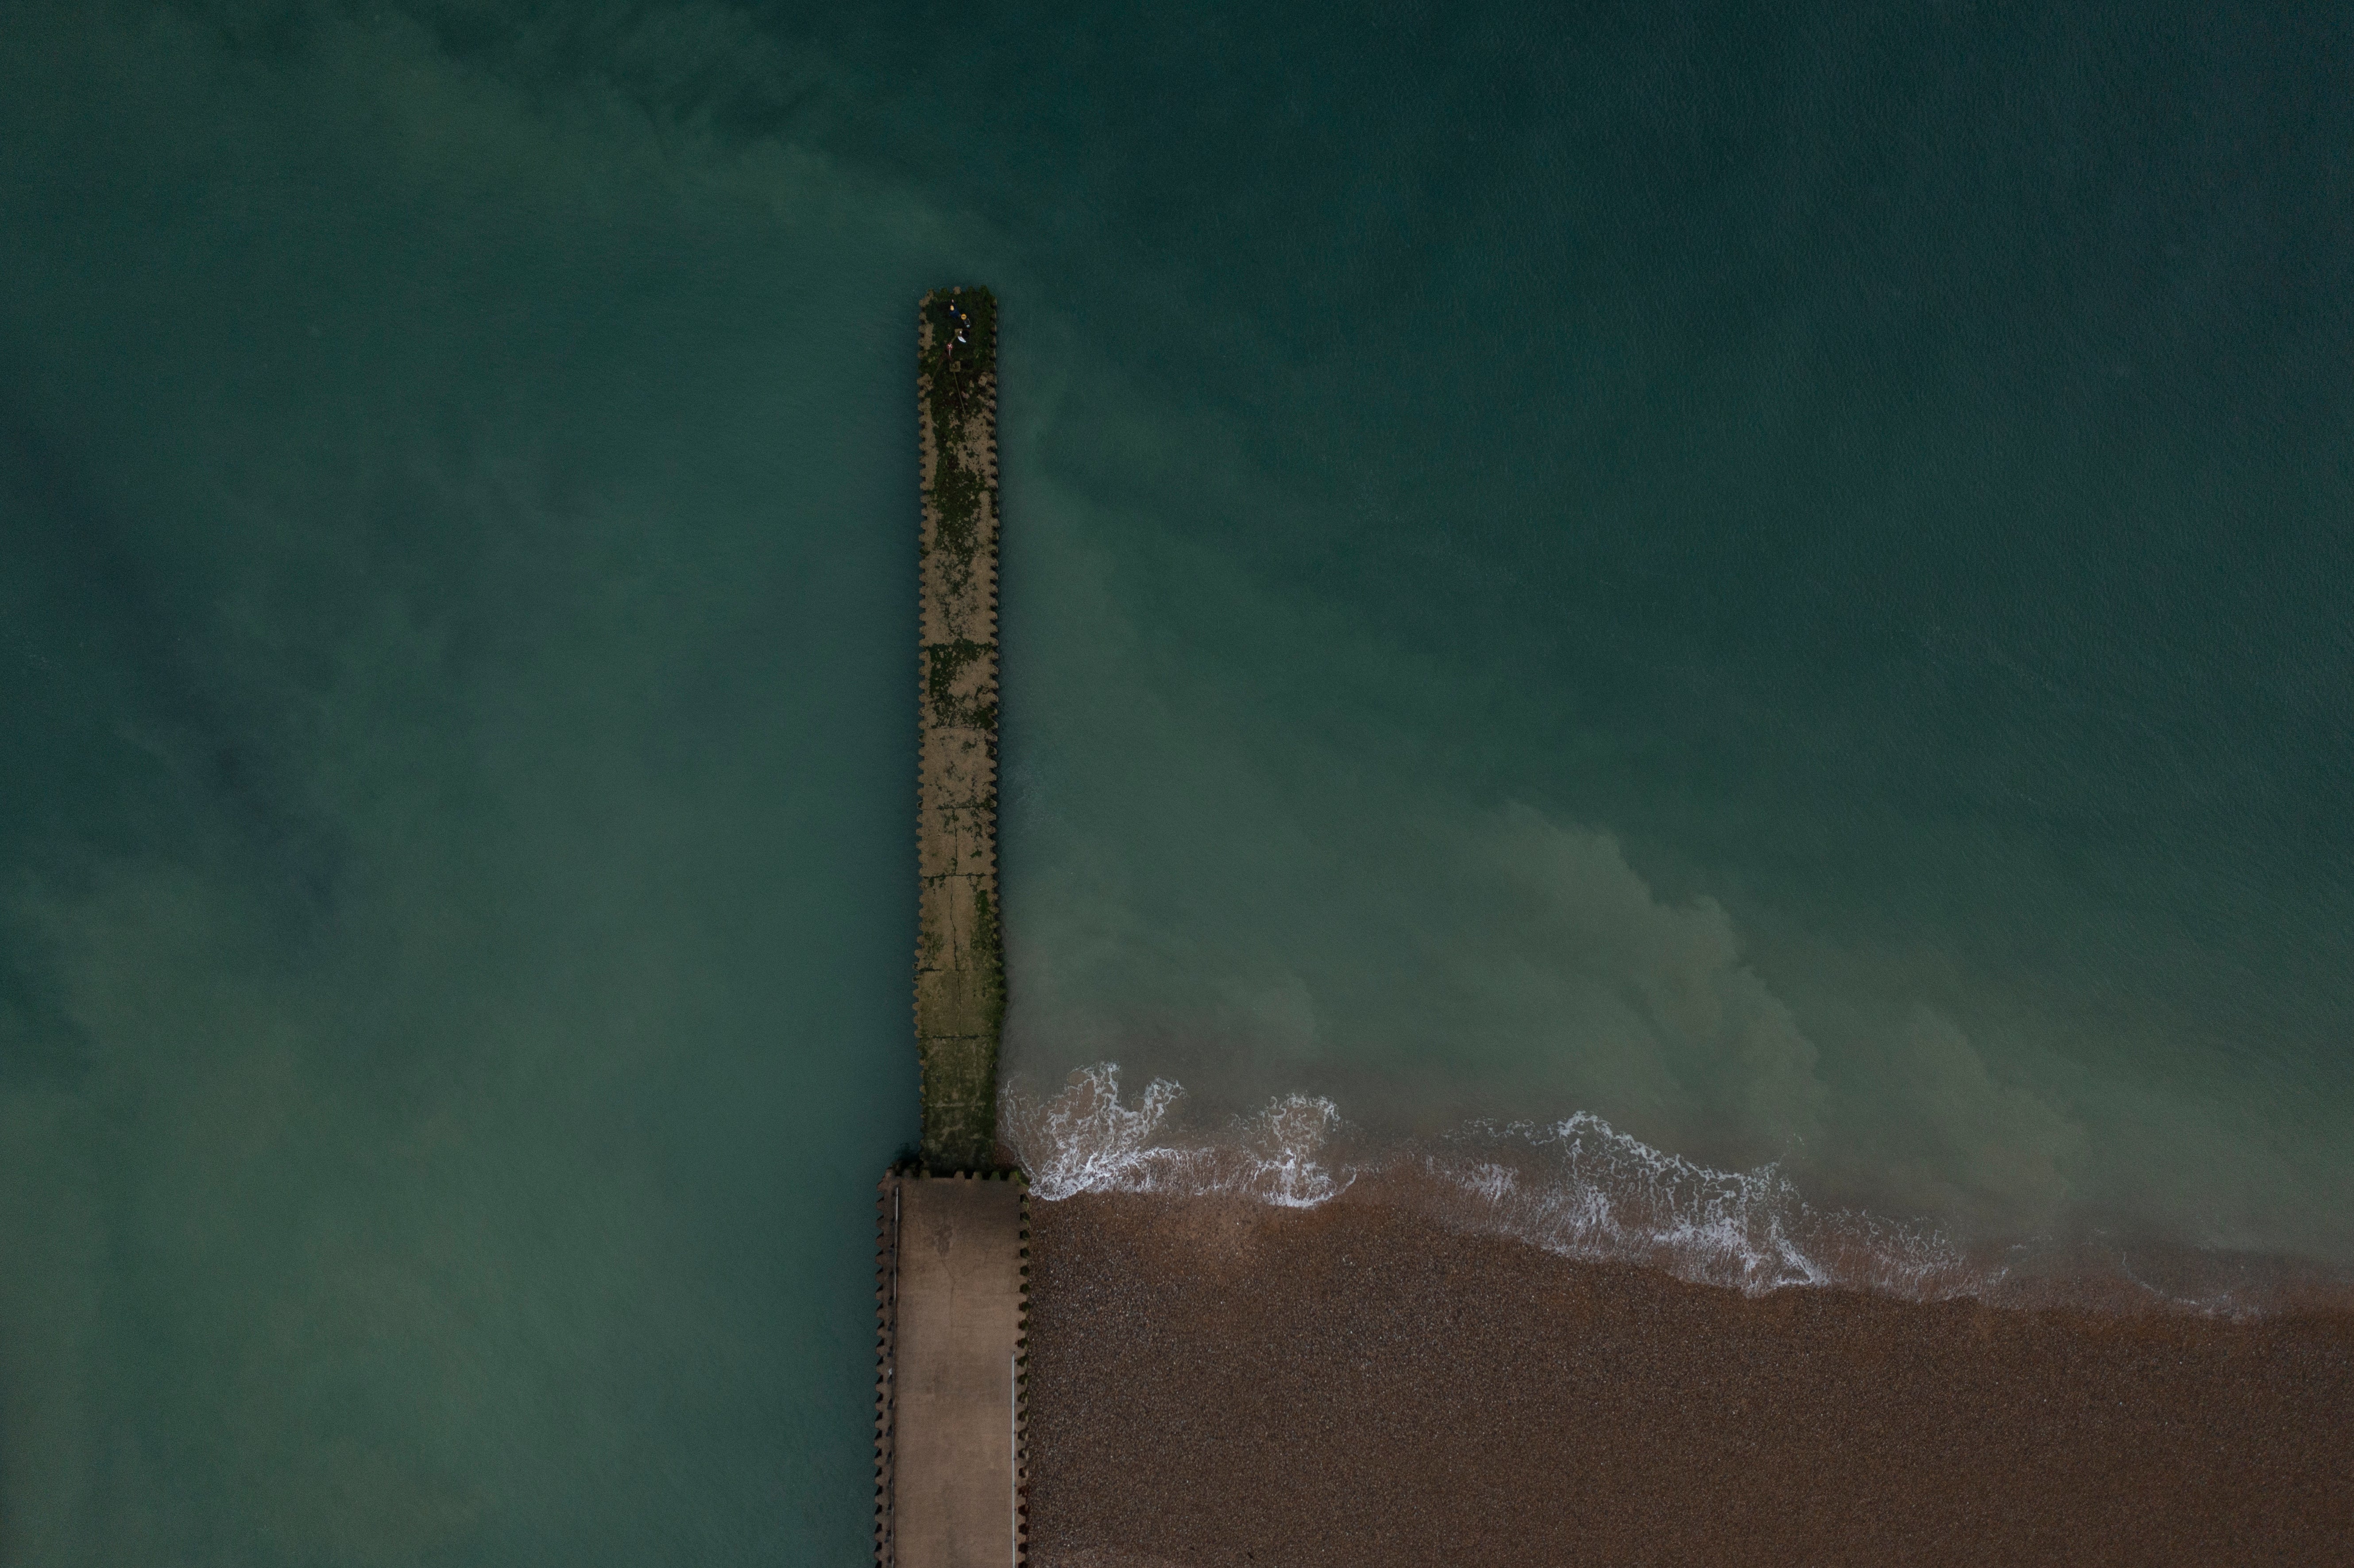 A jetty beneath which raw sewage was reportedly discharged on 17 August in Seaford, East Sussex